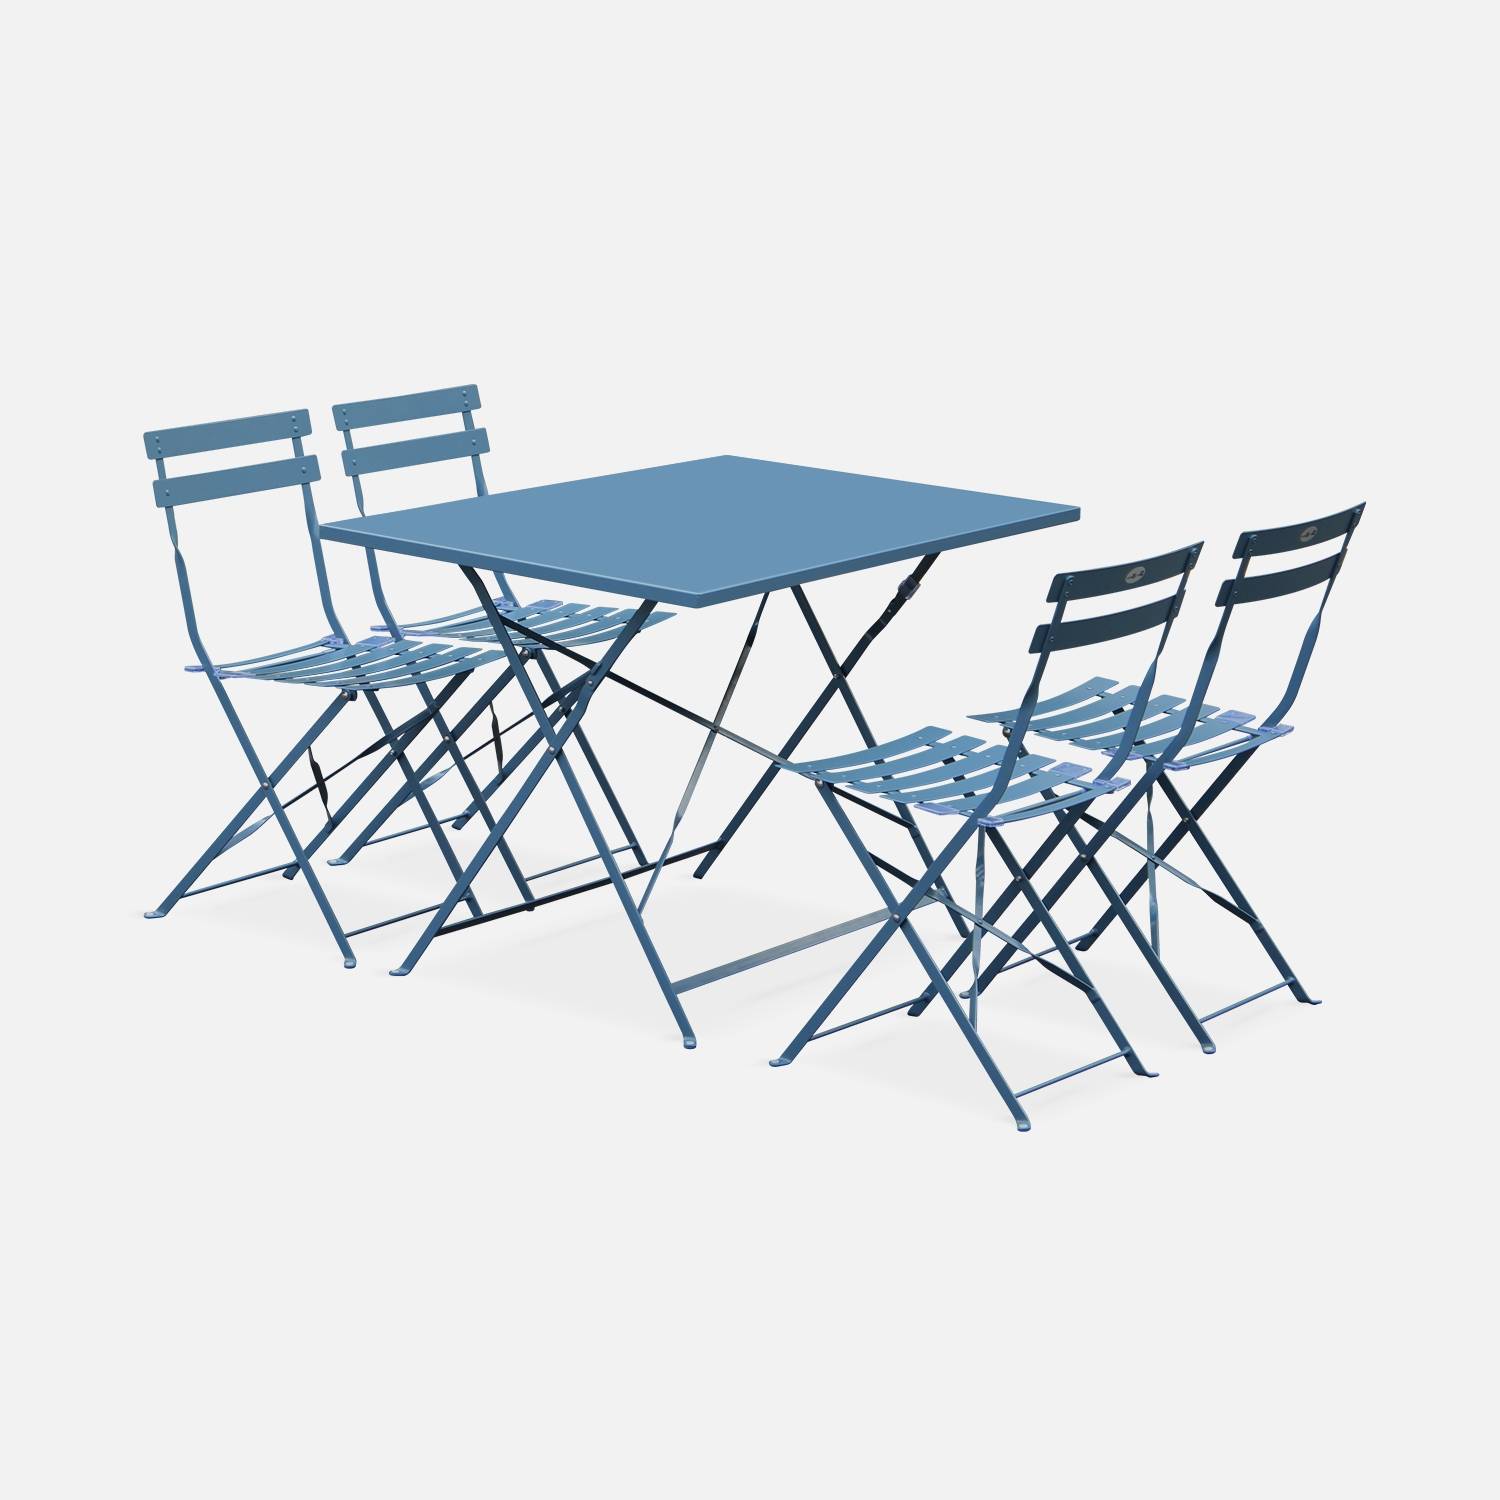 4-seater foldable thermo-lacquered steel bistro garden table with chairs, 110x70cm, Grey blue | sweeek